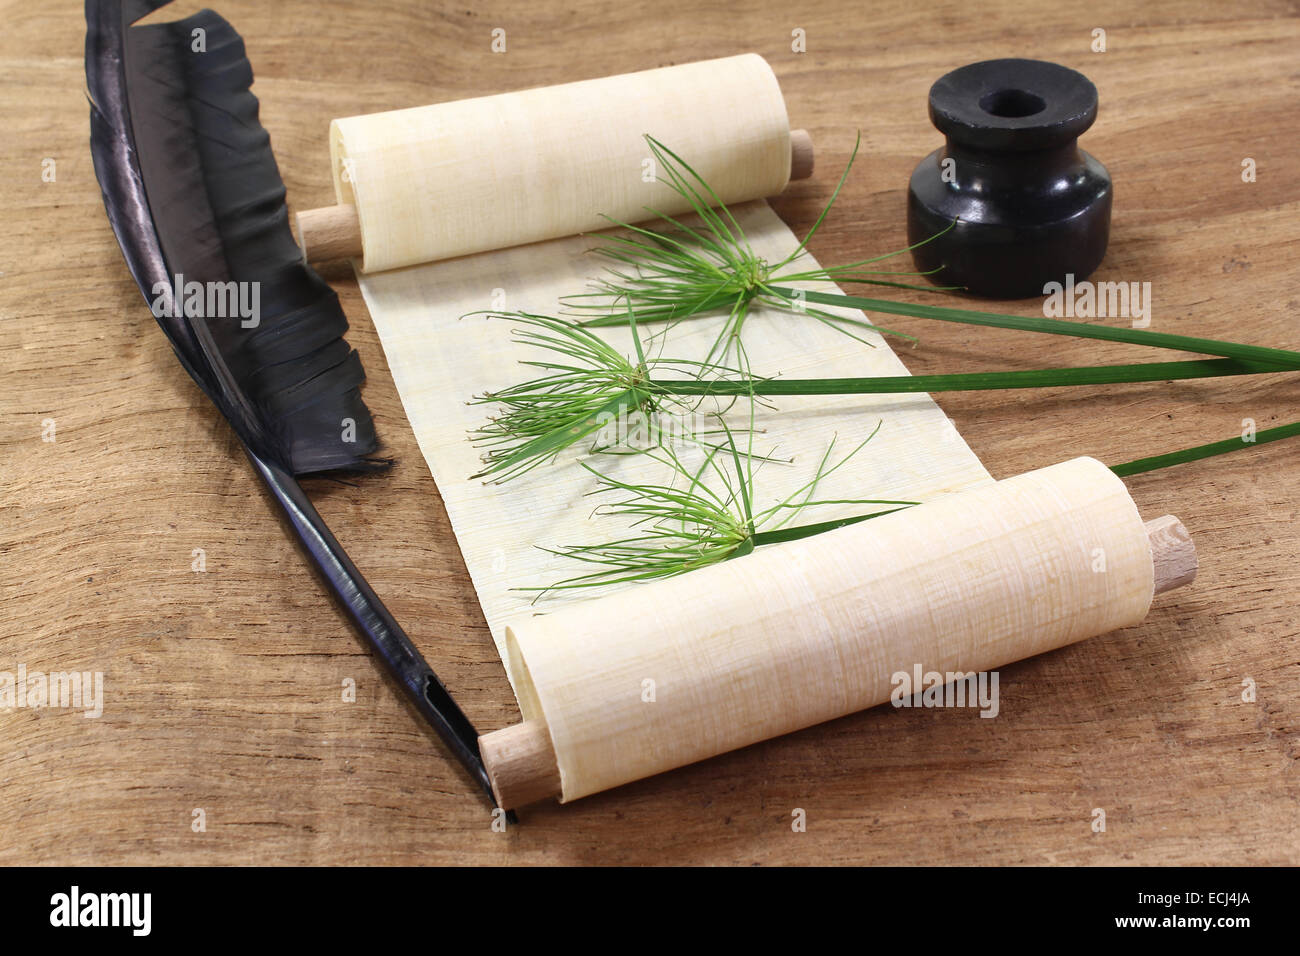 Papyrus scroll with plant, quill and inkwell Stock Photo